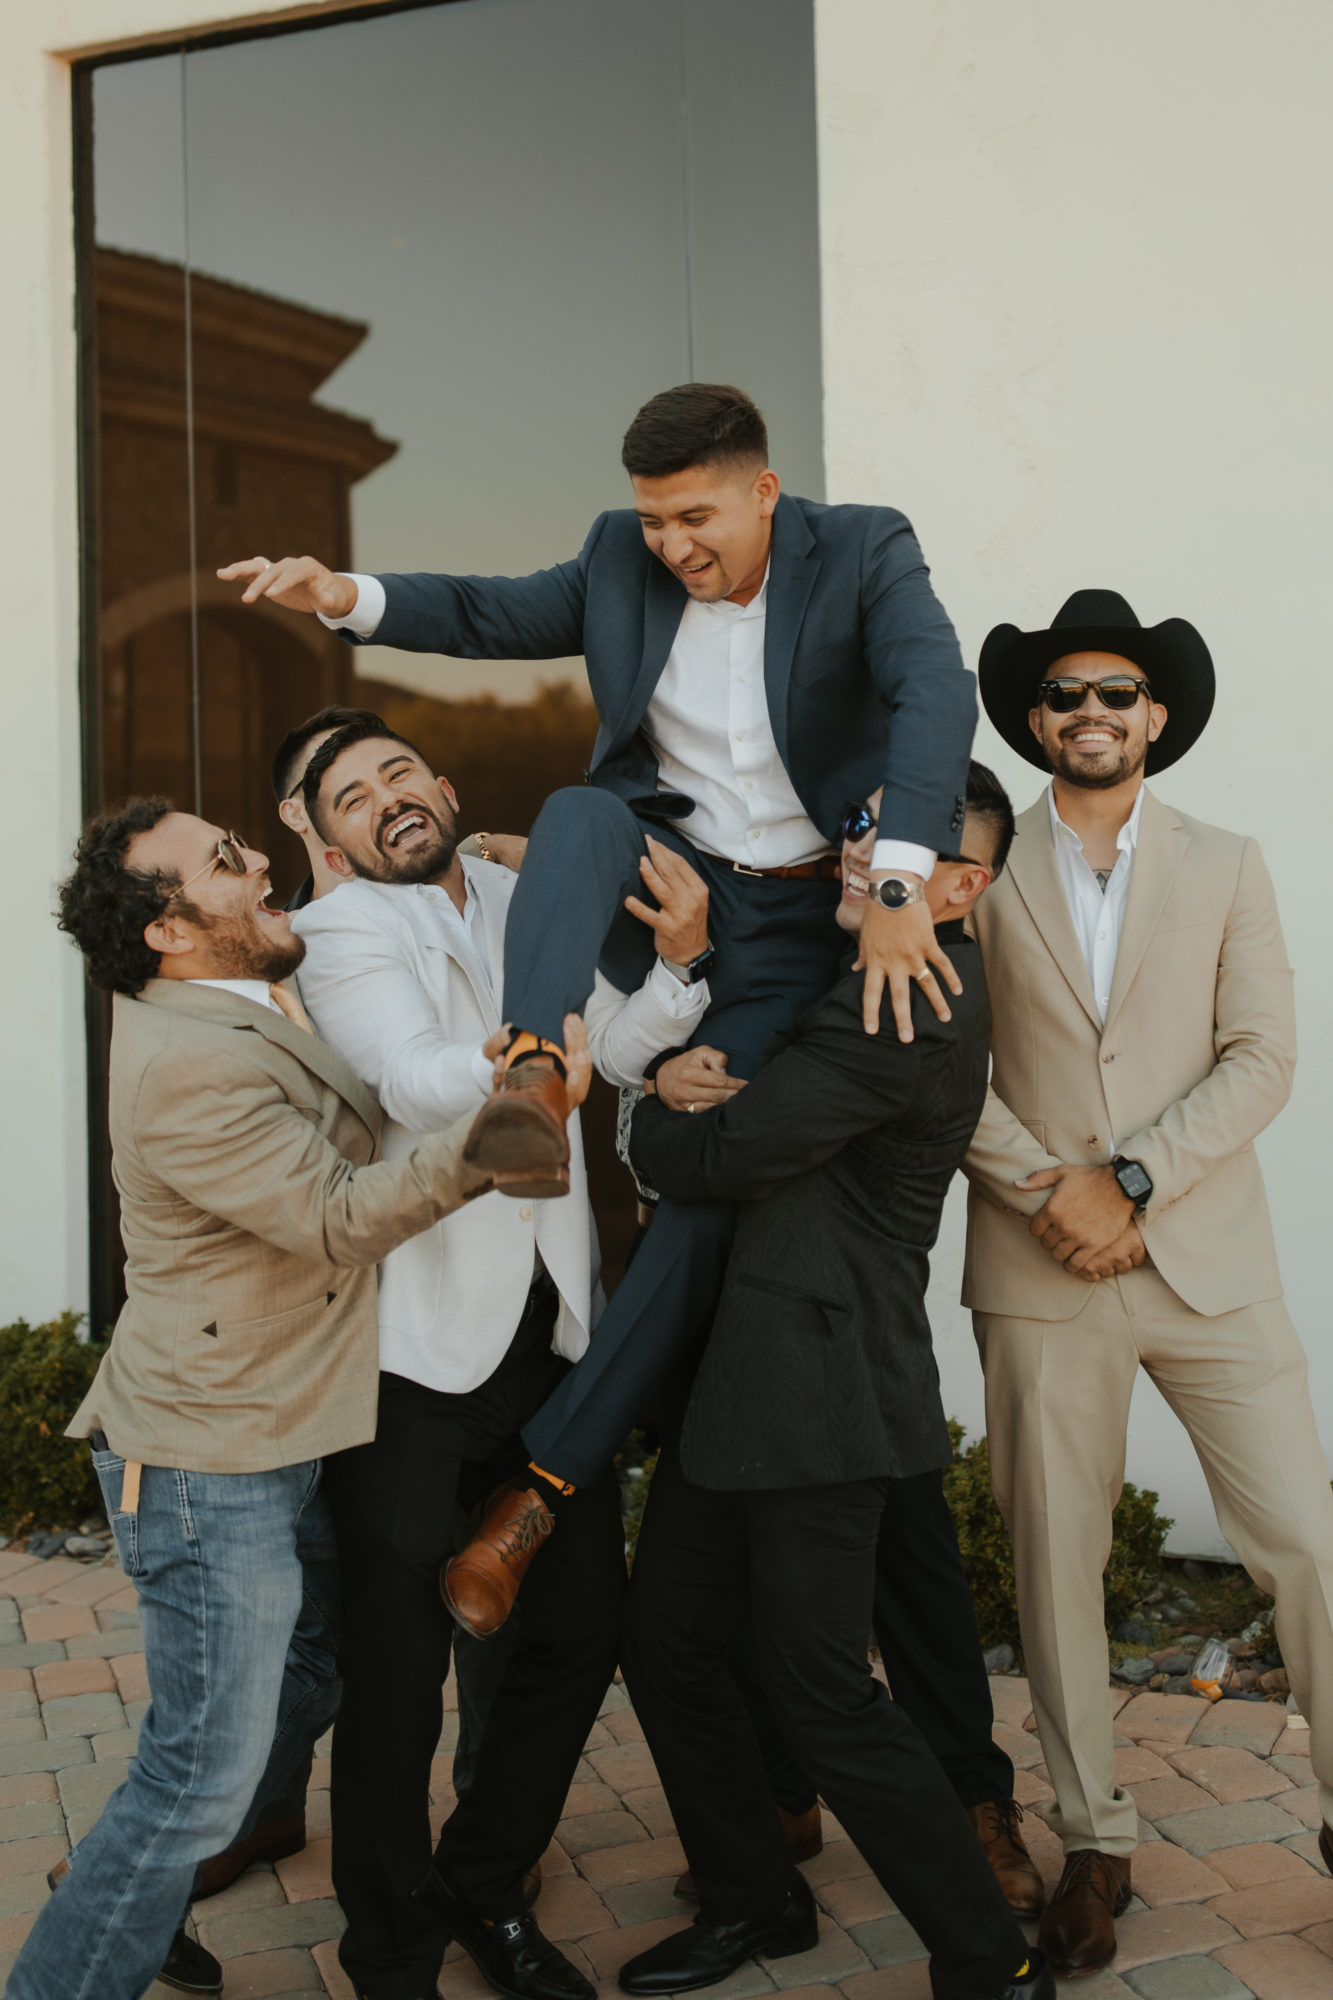 groom getting lifted into the air by his guy friends after the wedding ceremony